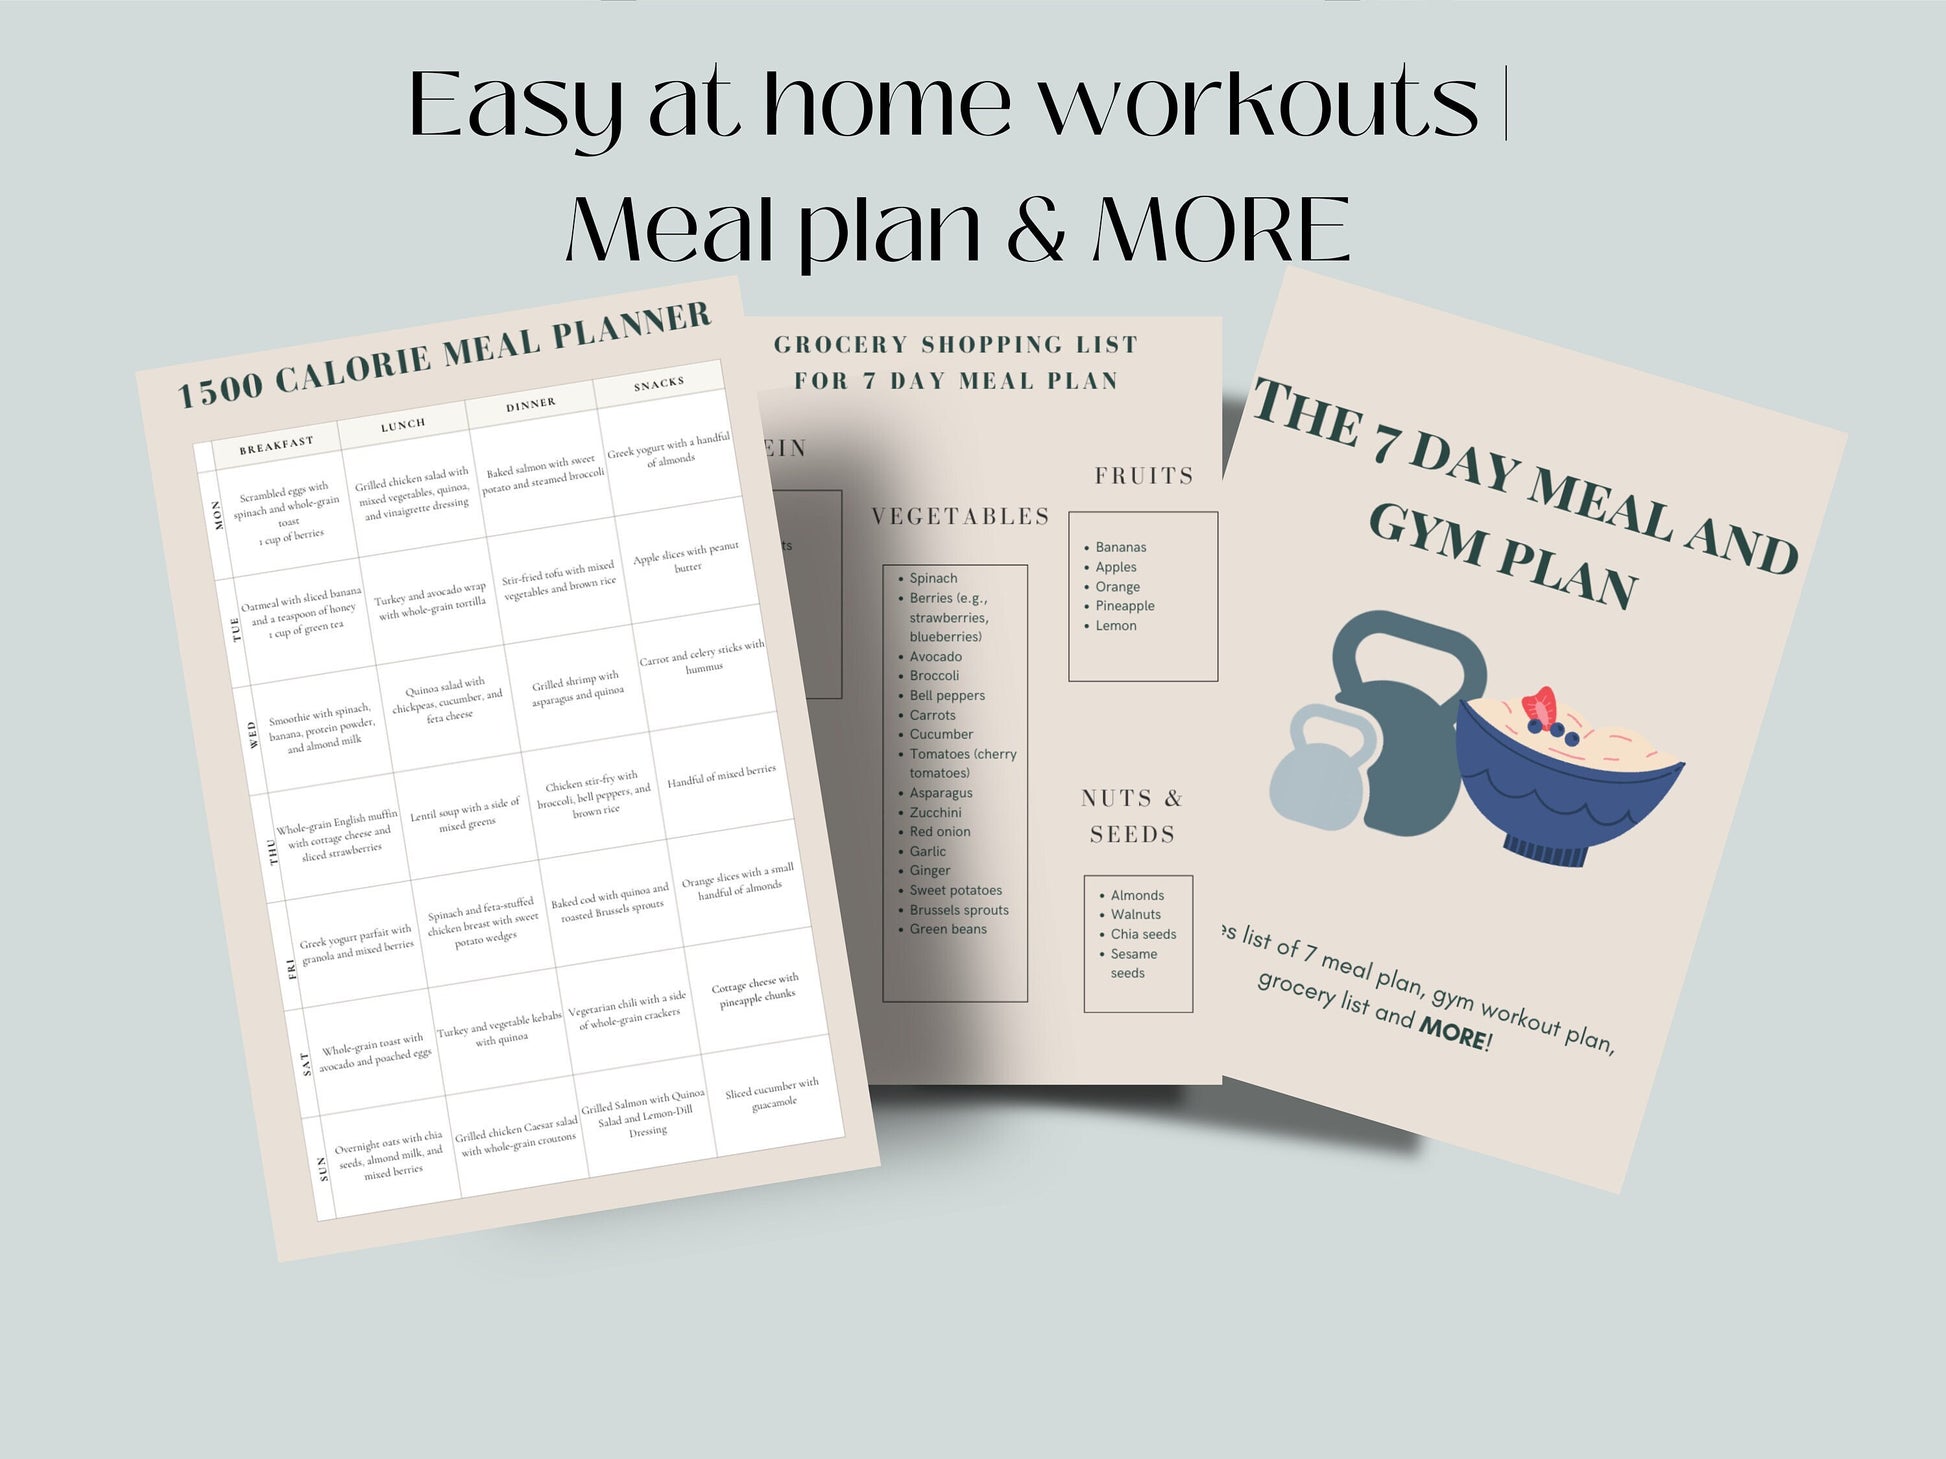 weekly meal plan, plan, workout. Fitness gym plan, workout planner, meal plans, meal planning, meal planner, prinable, grocery list, weight loss, meal,planner, gym, at home workouts, meal and gym plan for weight loss, 1500 calories meal plan, calorie